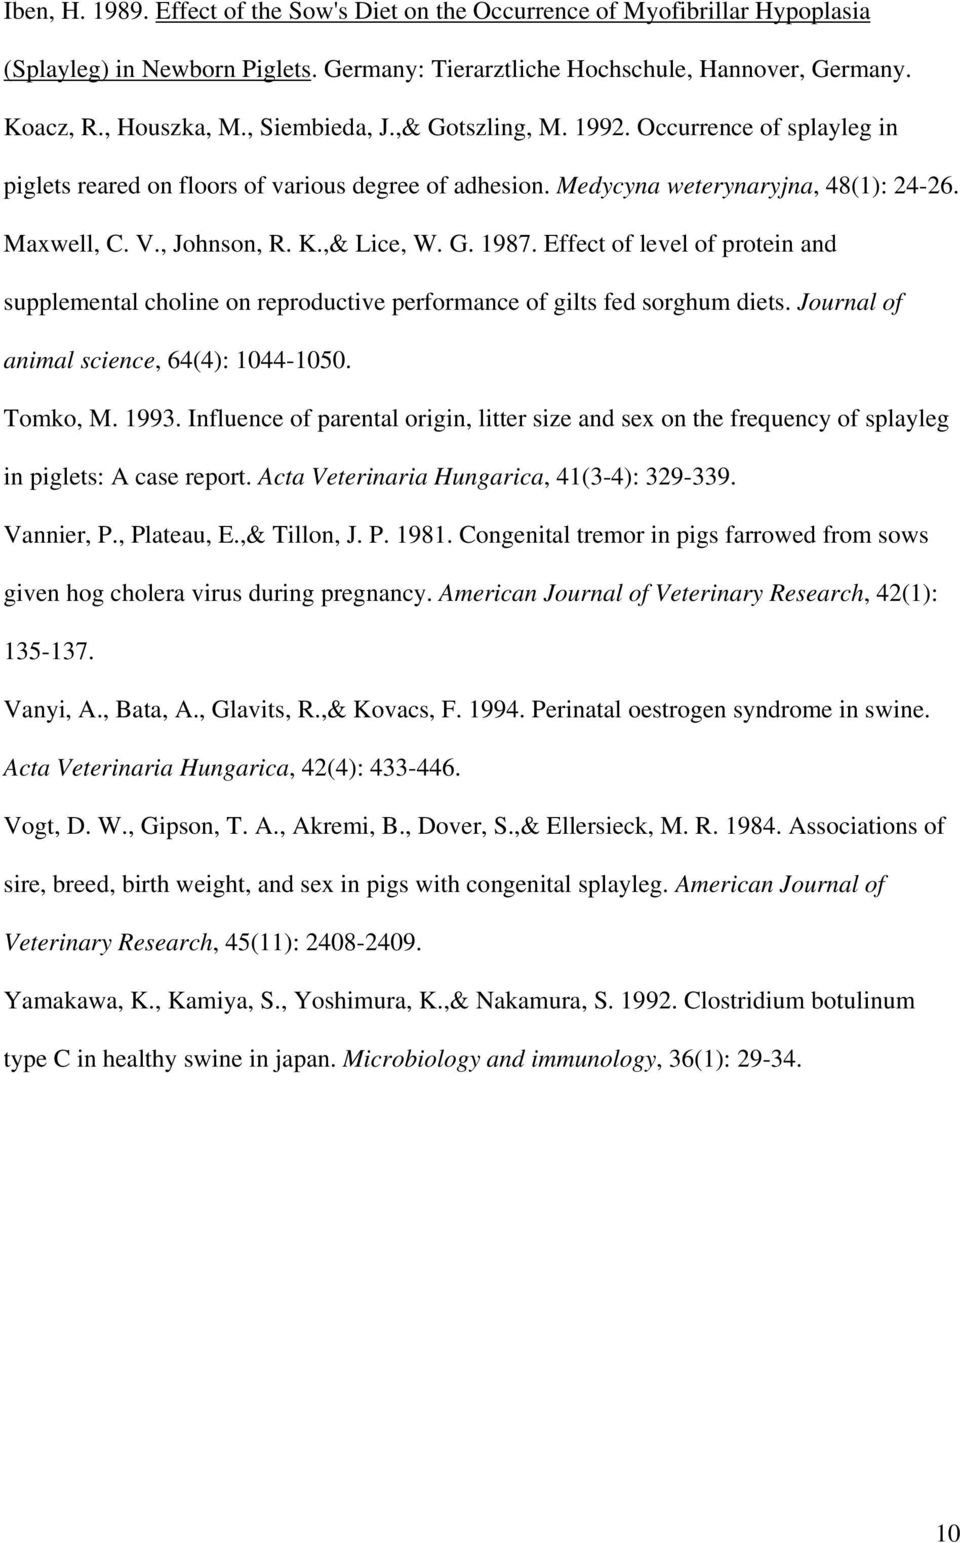 G. 1987. Effect of level of protein and supplemental choline on reproductive performance of gilts fed sorghum diets. Journal of animal science, 64(4): 1044-1050. Tomko, M. 1993.